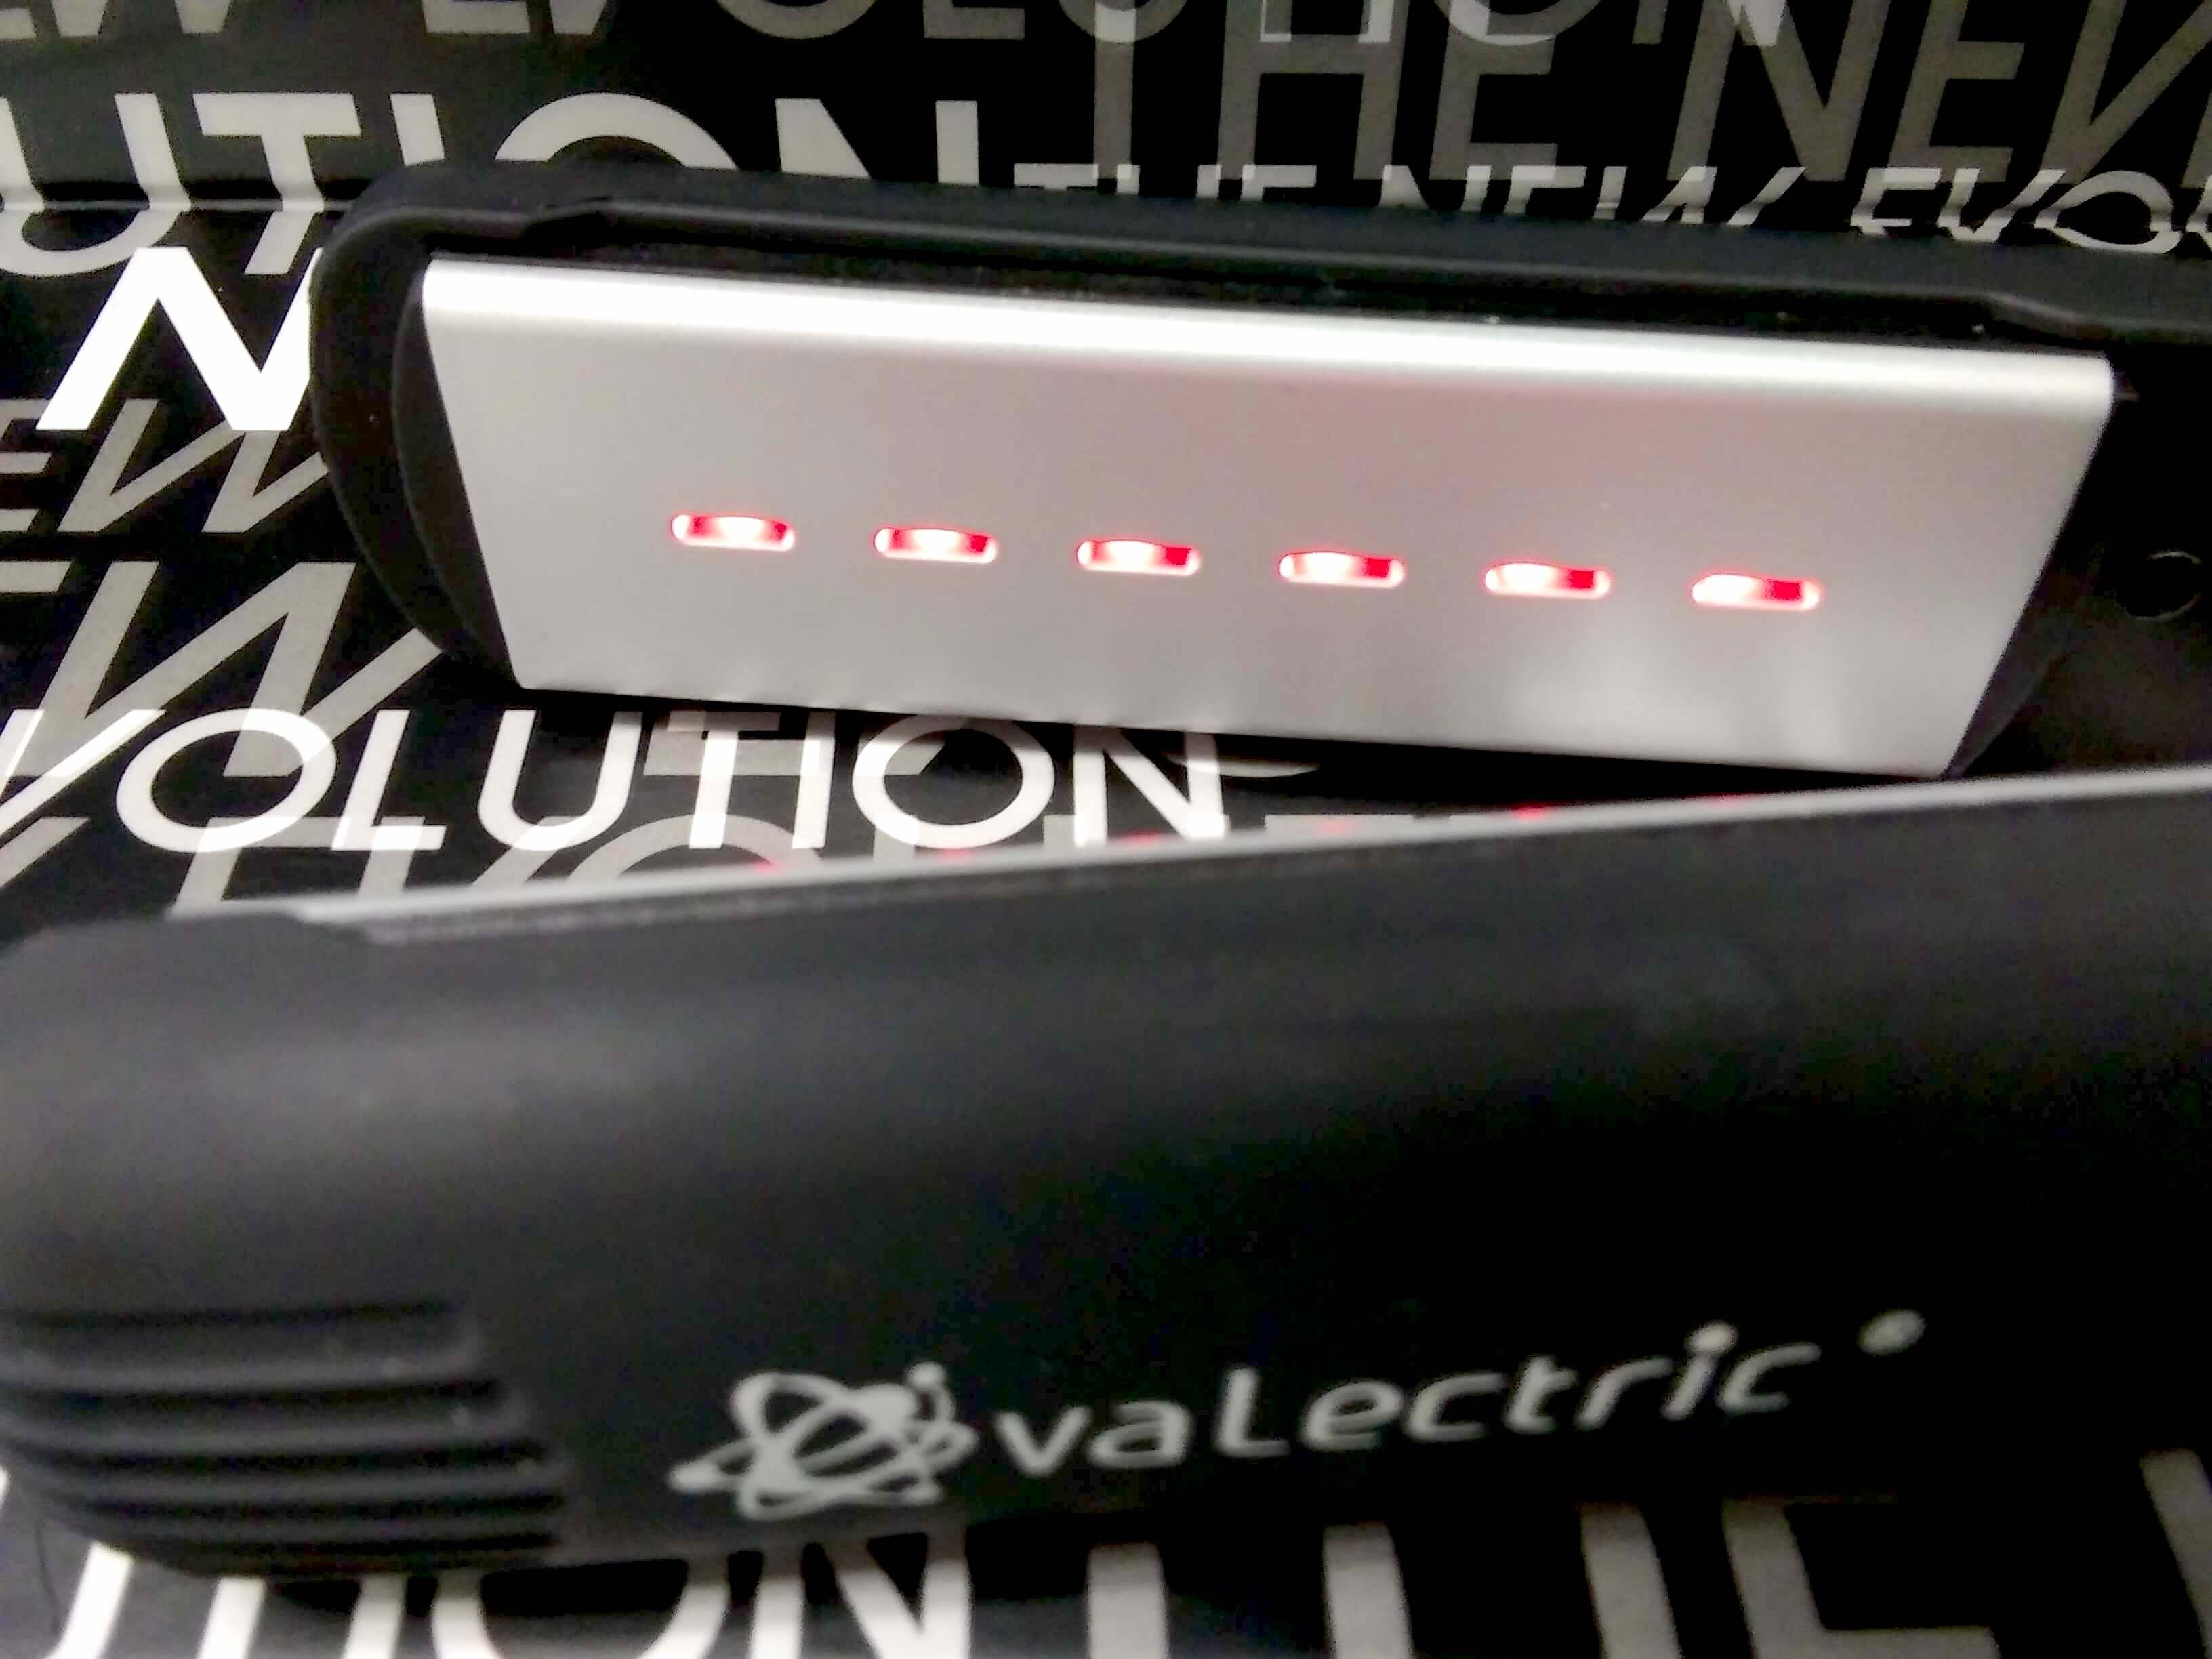 Evalectric Iconic LED Straightener review